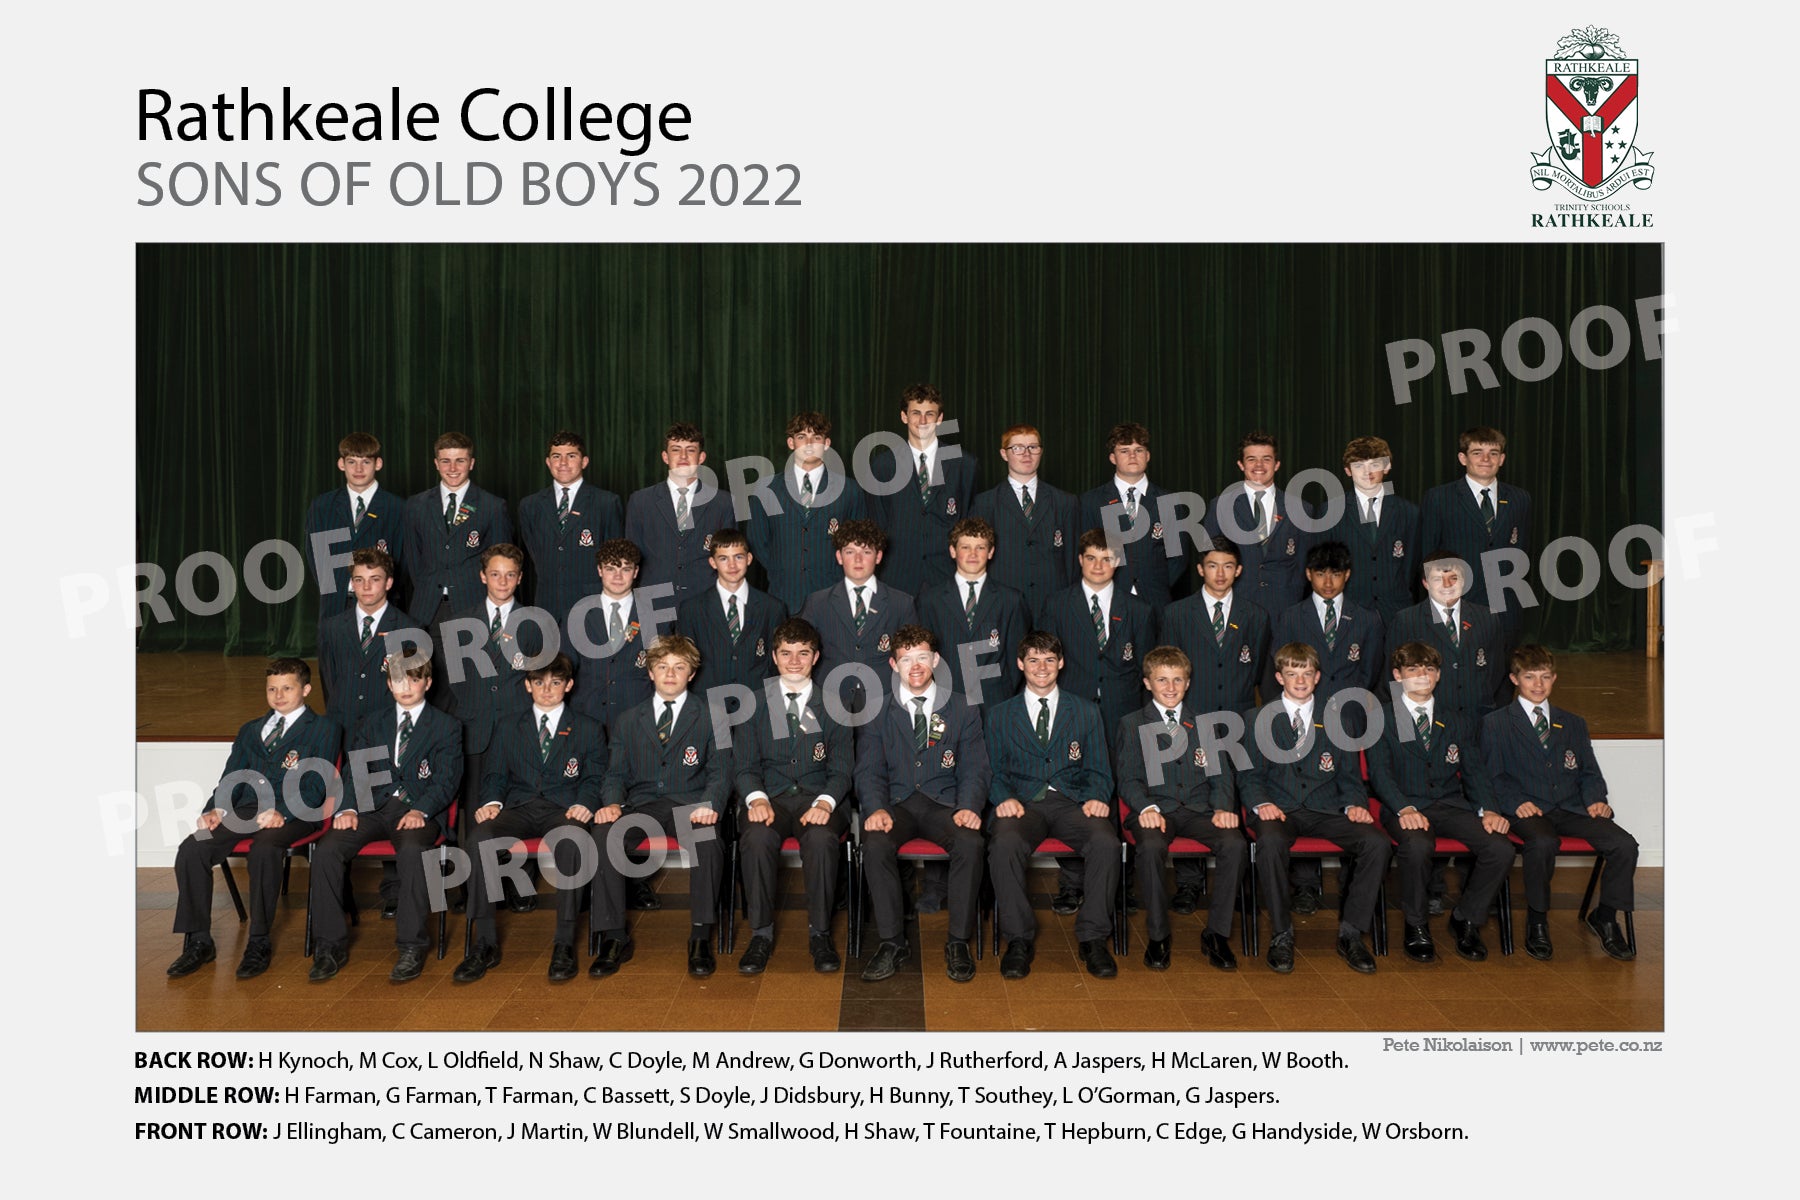 Sons of Old Boys - Rathkeale College 2022